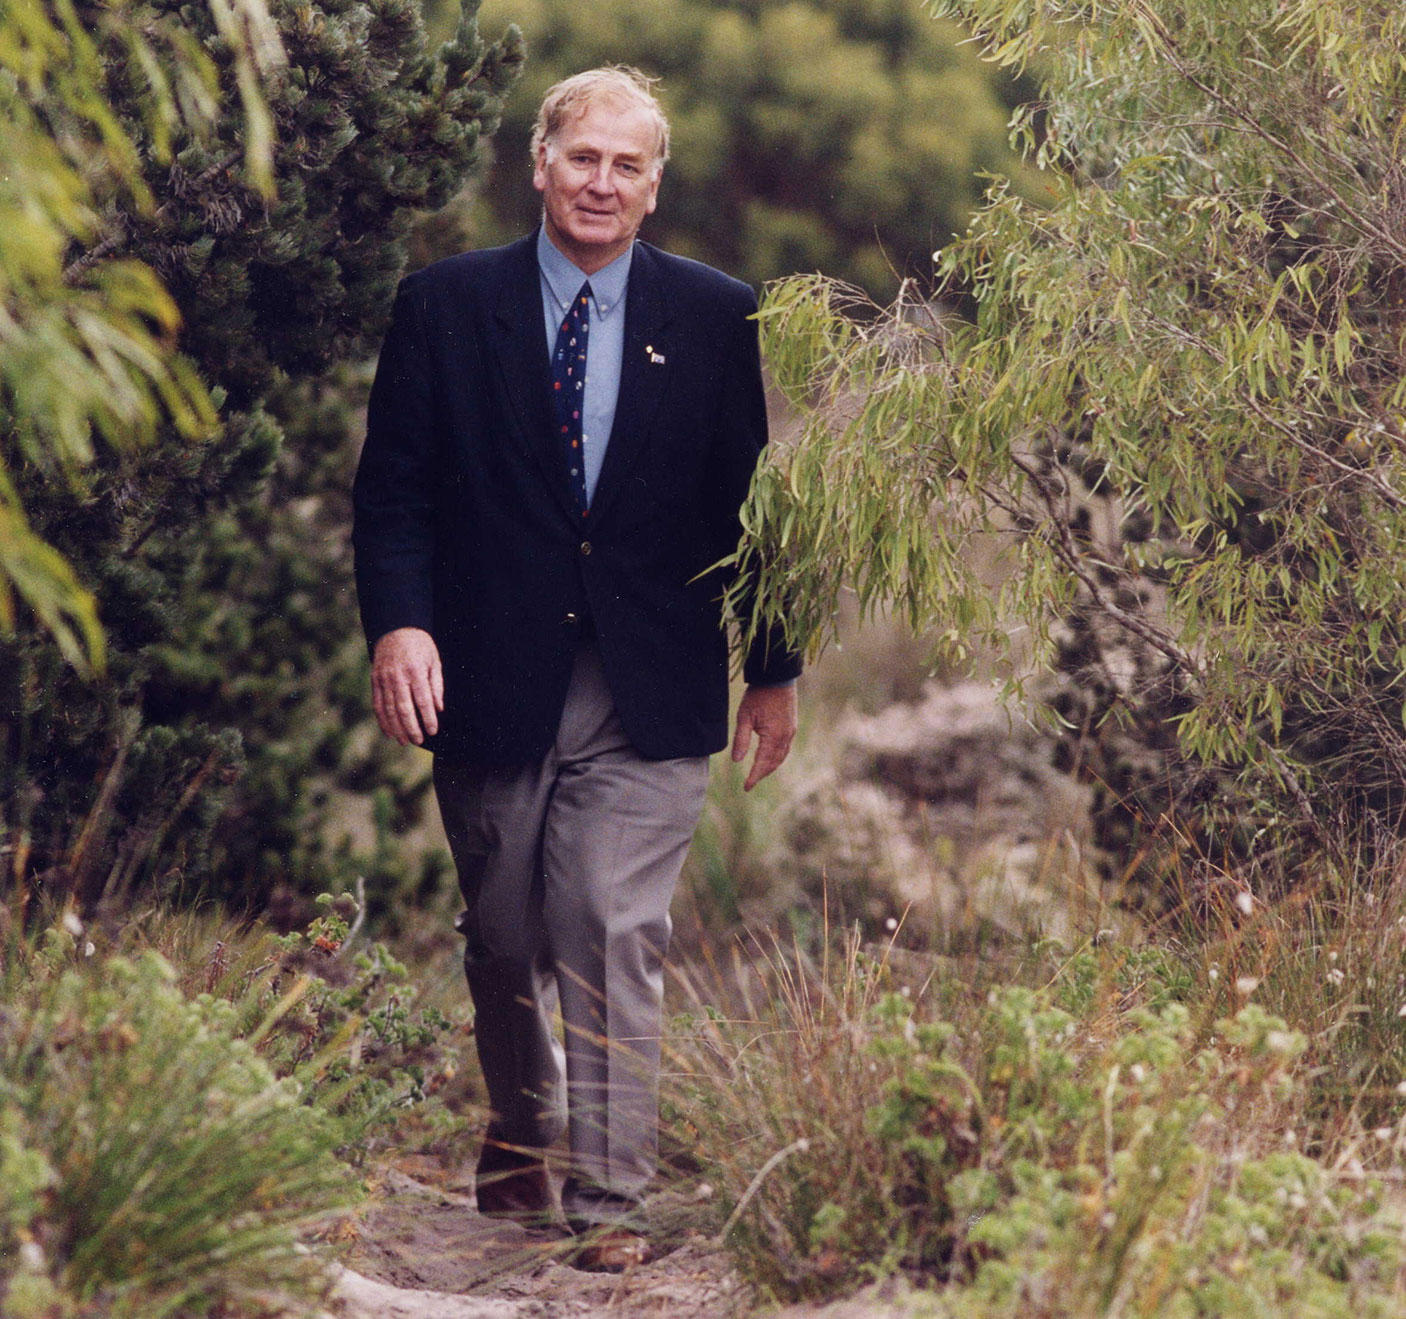 Historical photograph of Mike Stidwell in a bushland setting